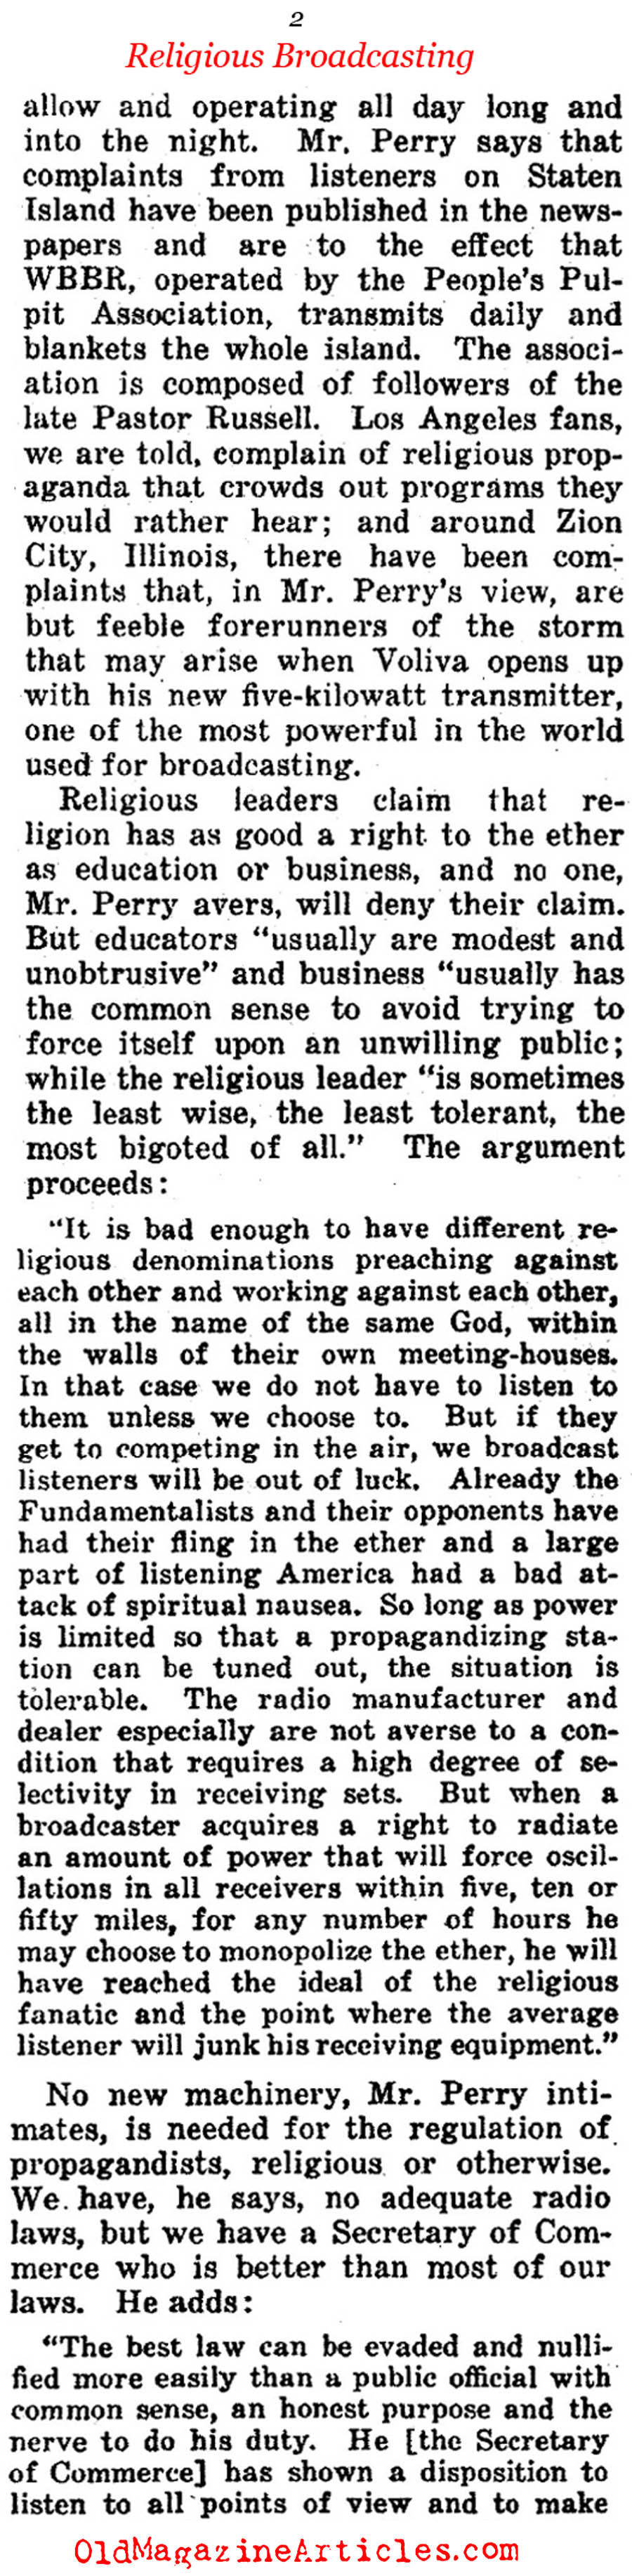 Christian Radio Broadcasting Begins in Earnest (Current Opinion, 1925)